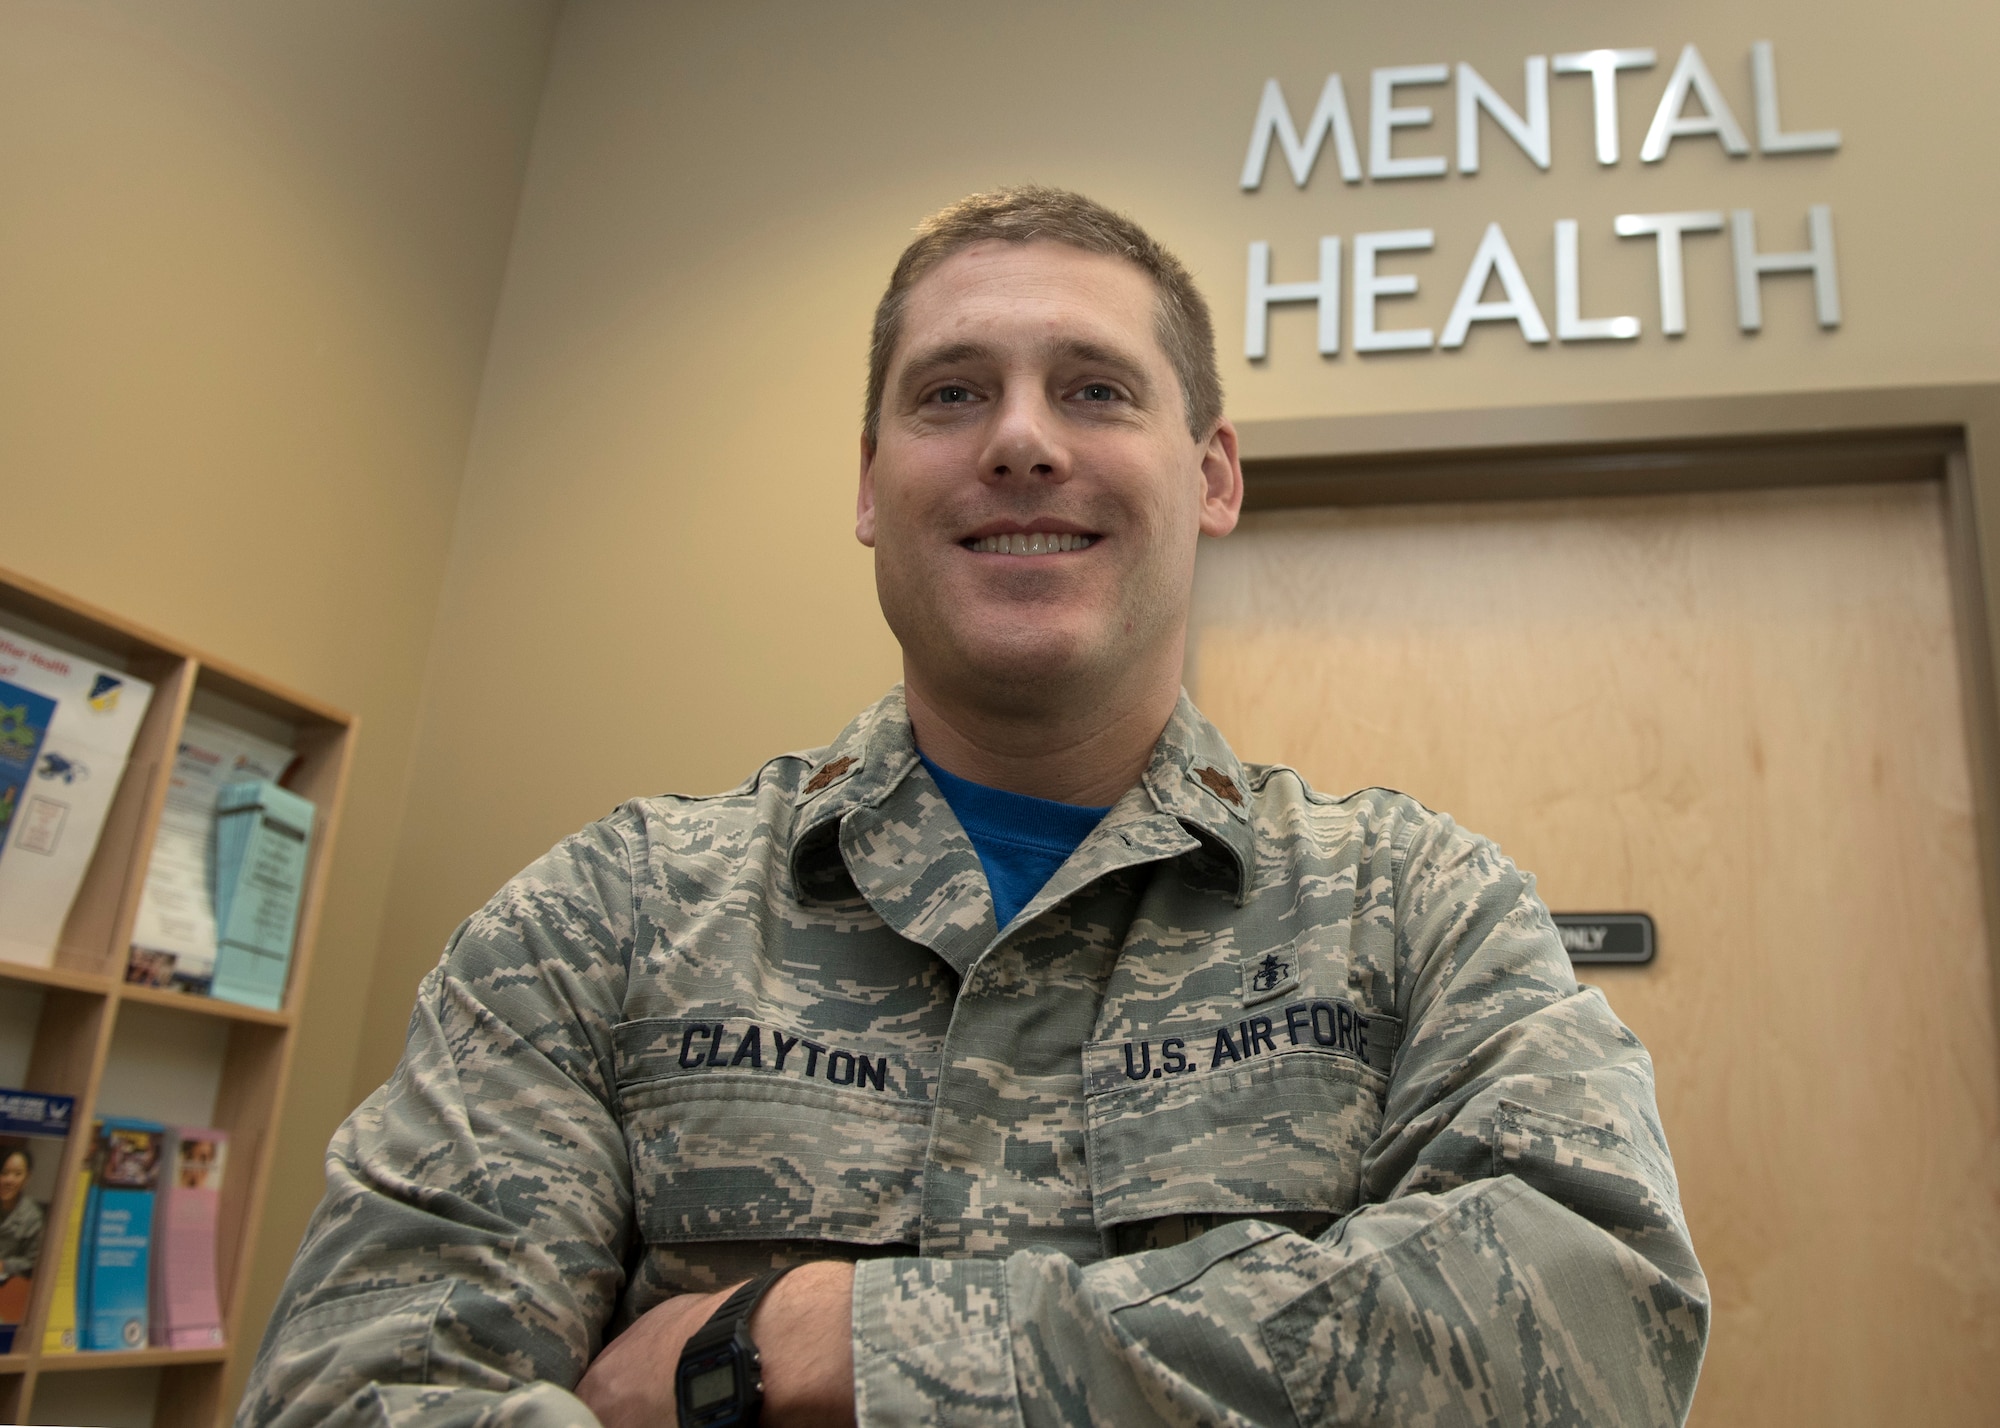 Maj. Spencer Clayton, 49th MDG Mental Health flight commander, poses outside the Mental Health clinic, Jan. 14, 2019, on Holloman Air Force Base, N.M. Mental Health staff are responsible for the overall mental well-being of Airmen across the base, and they work to keep Airmen fit to complete the mission, as well as live a happy life. (U.S. Air Force photo by Staff Sgt. Timothy Young)